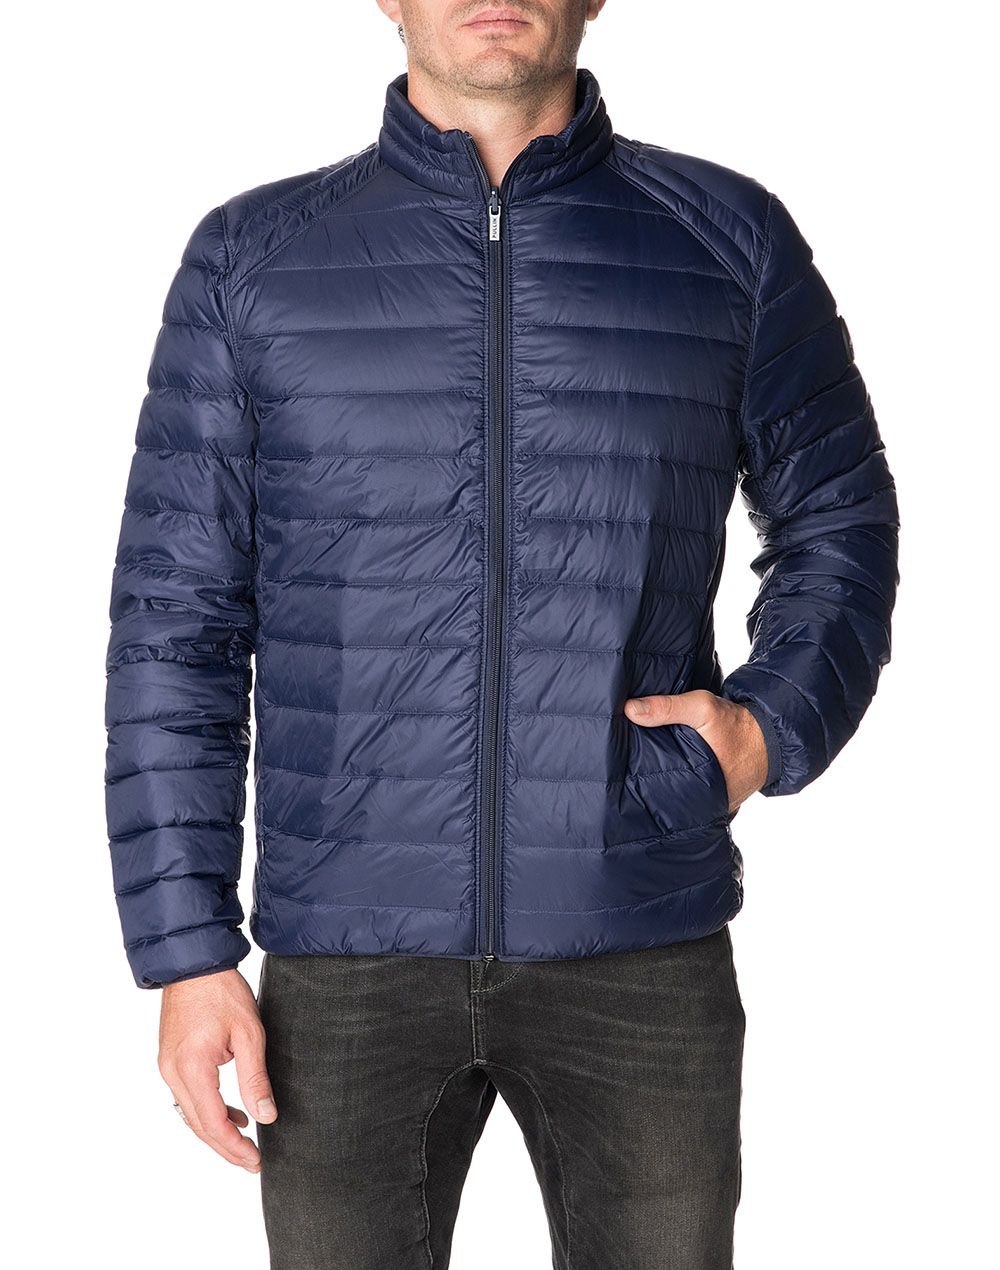 Men's feather jacket withoud hood DAILLE